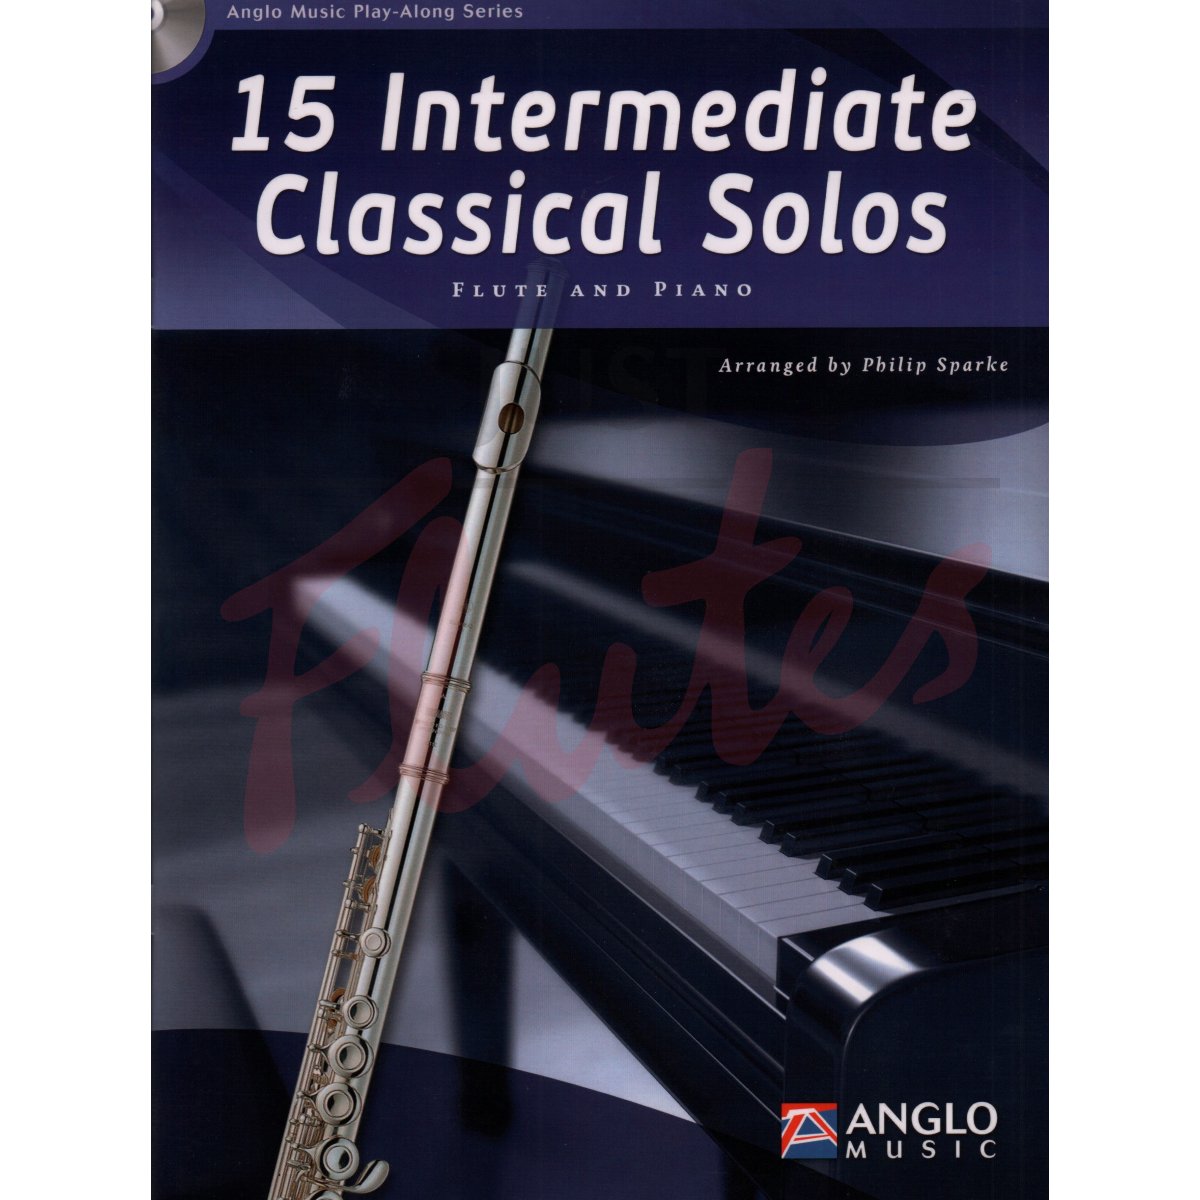 15 Intermediate Classical Solos for Flute and Piano